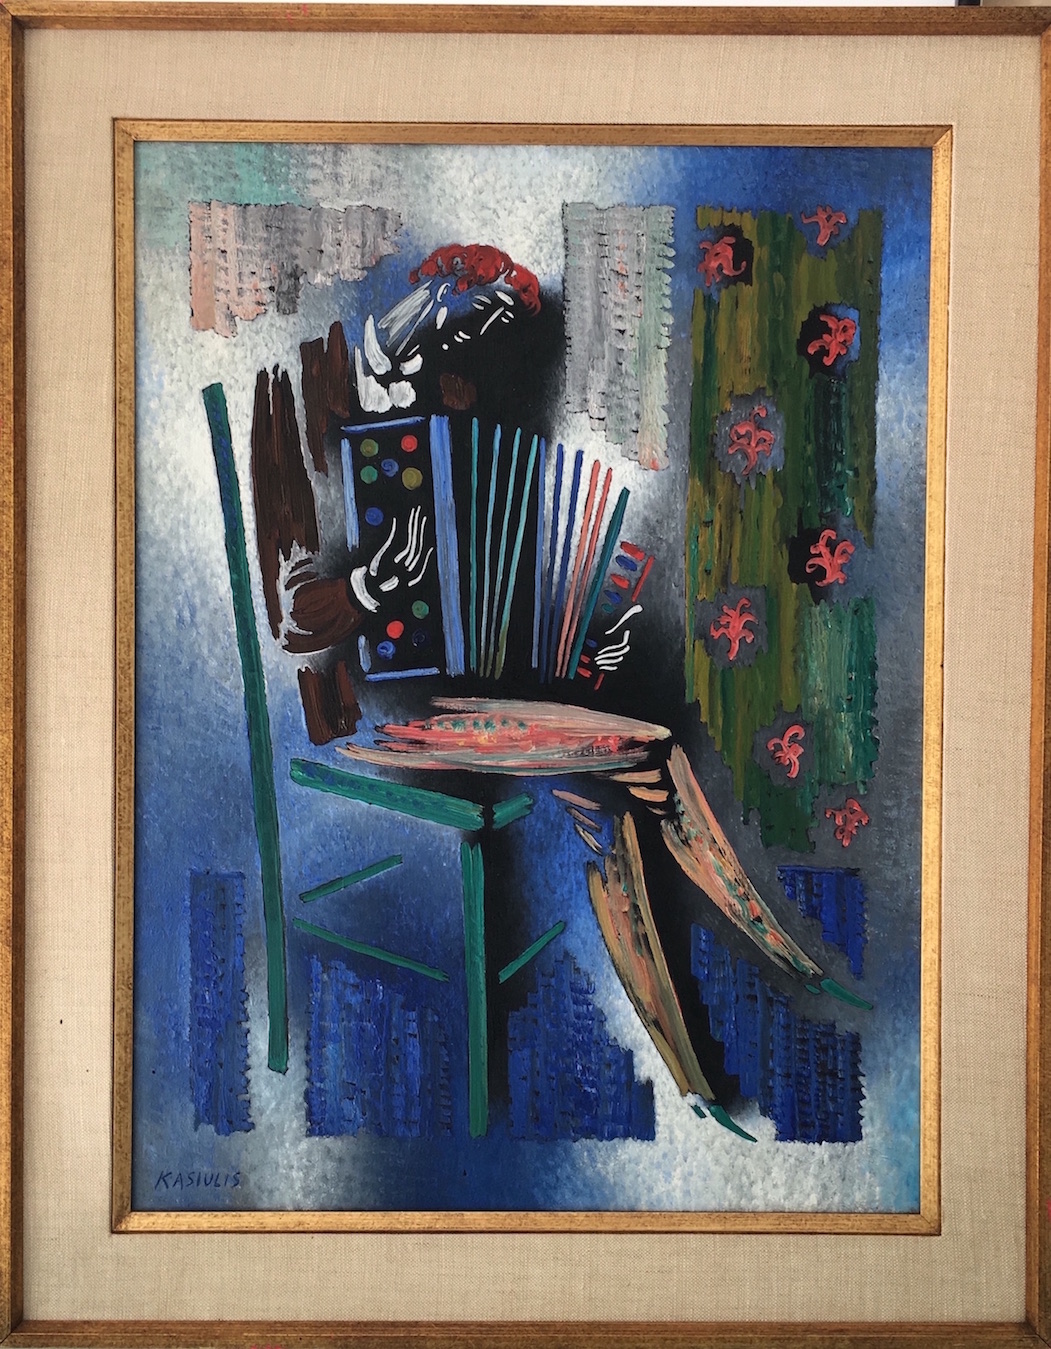 Vytautas Kasiulis (Lithuanian / French 1918-1995),‘The Accordionist,’ oil on canvas, 24 x 19 5/8 inches, 1960s. Estimate: $4,000-$6,000. Carlyle Galleries International image 